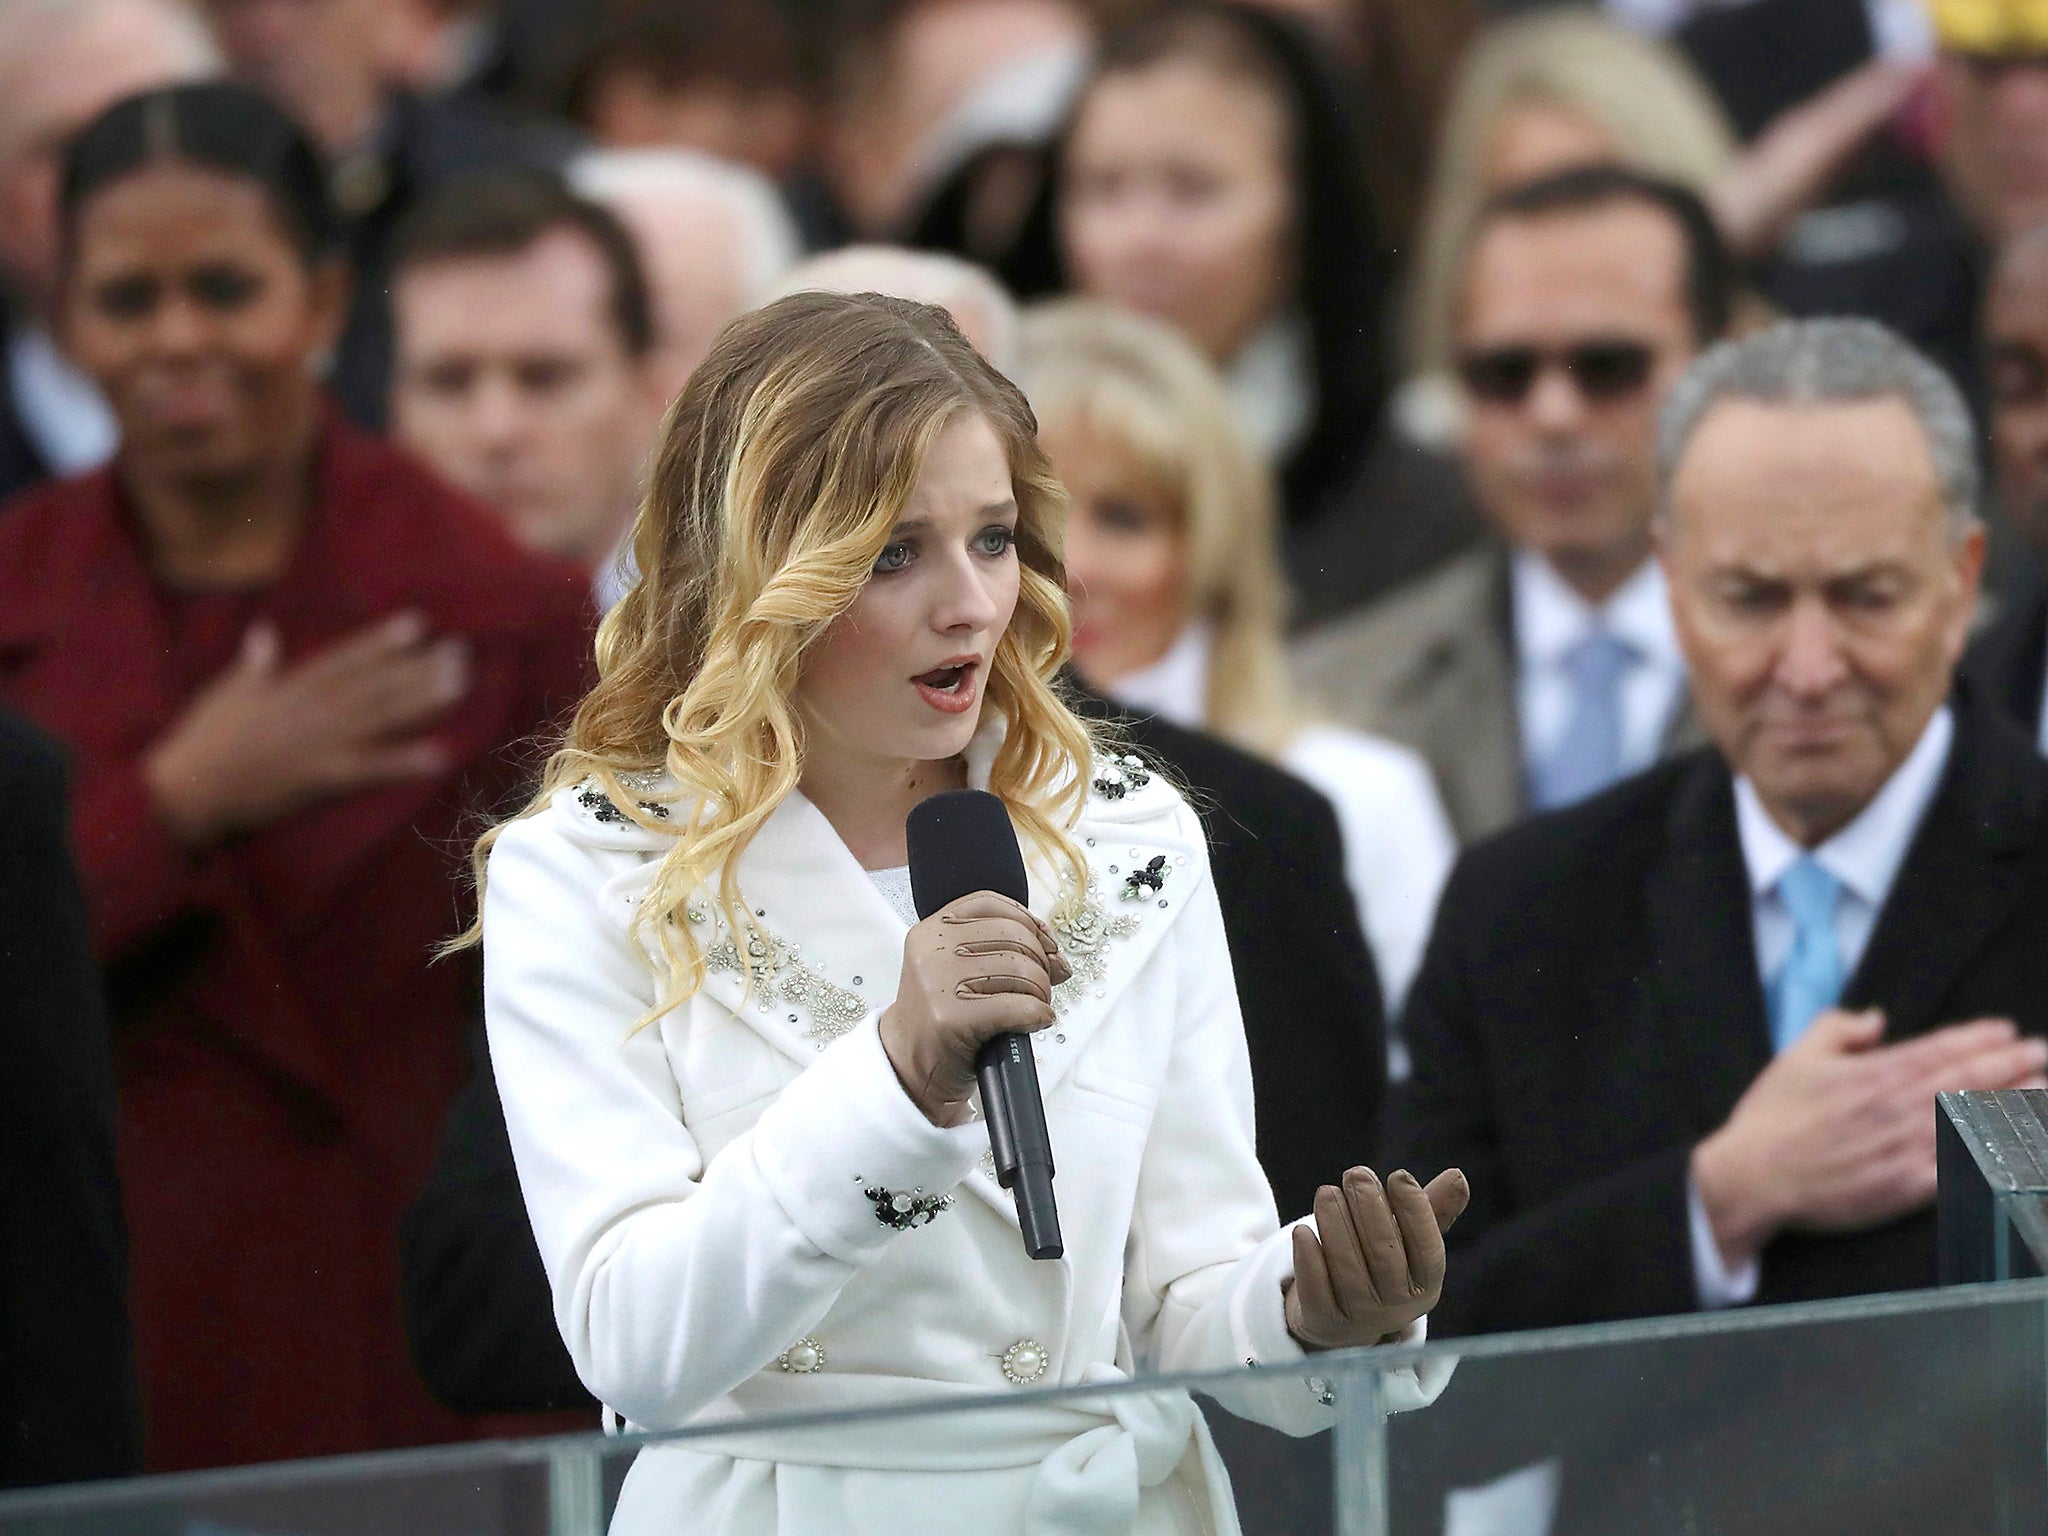 Jackie Evancho sings the U.S. National Anthem during inauguration ceremonies swearing in Donald Trump as the 45th president of the United States